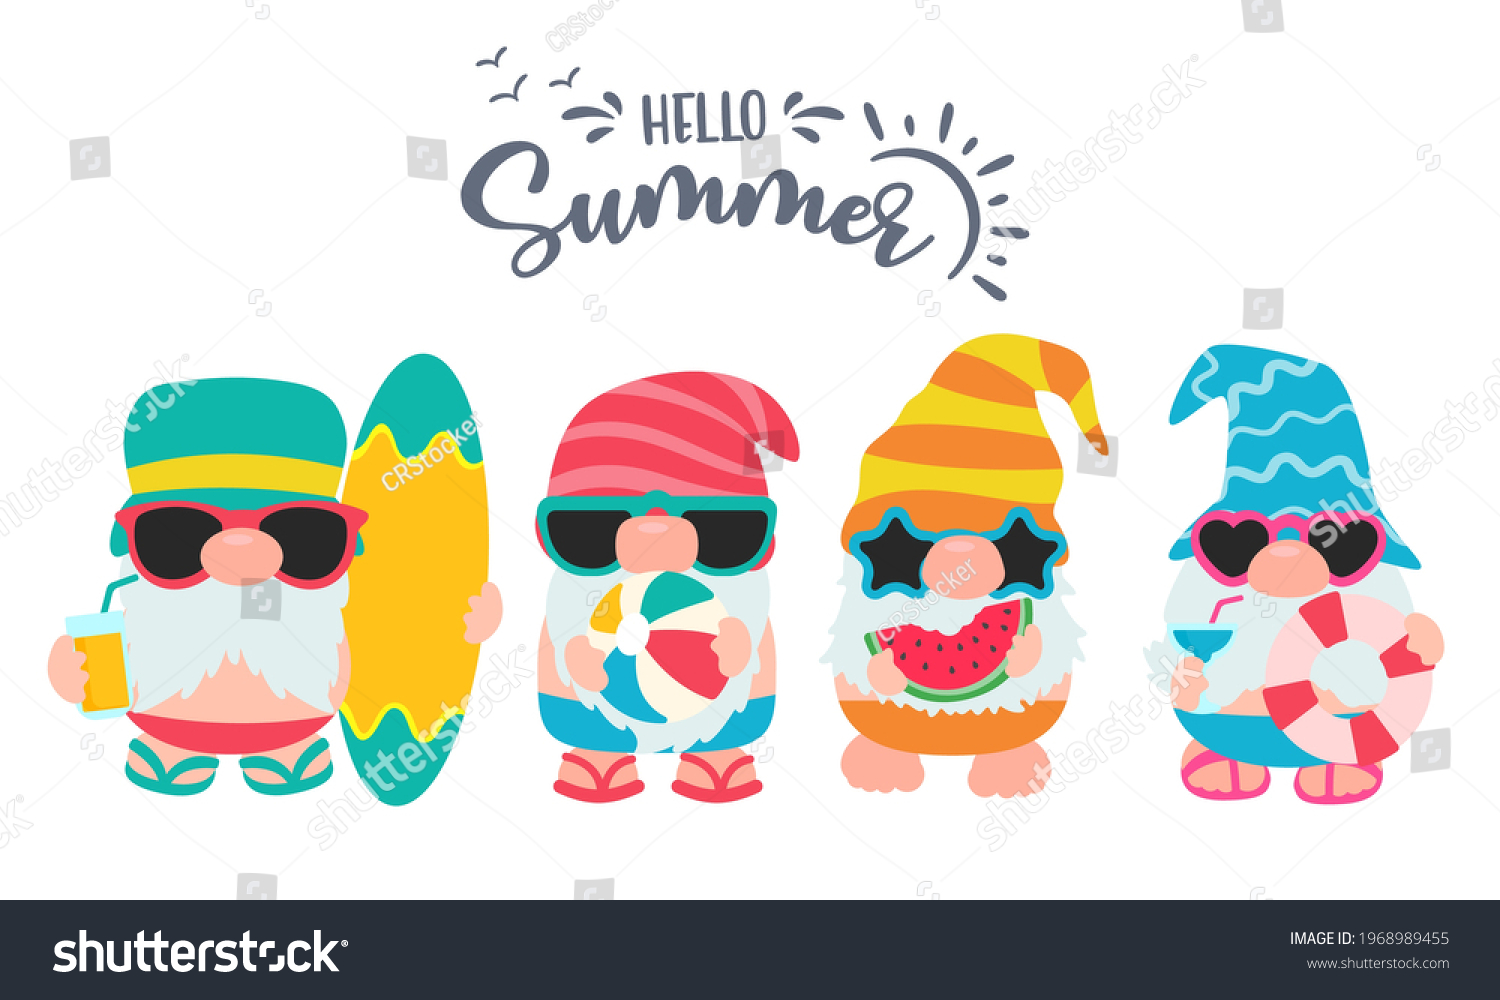 SVG of Gnomes Summer. Gnomes wear hats and sunglasses for summer trips to the beach. svg